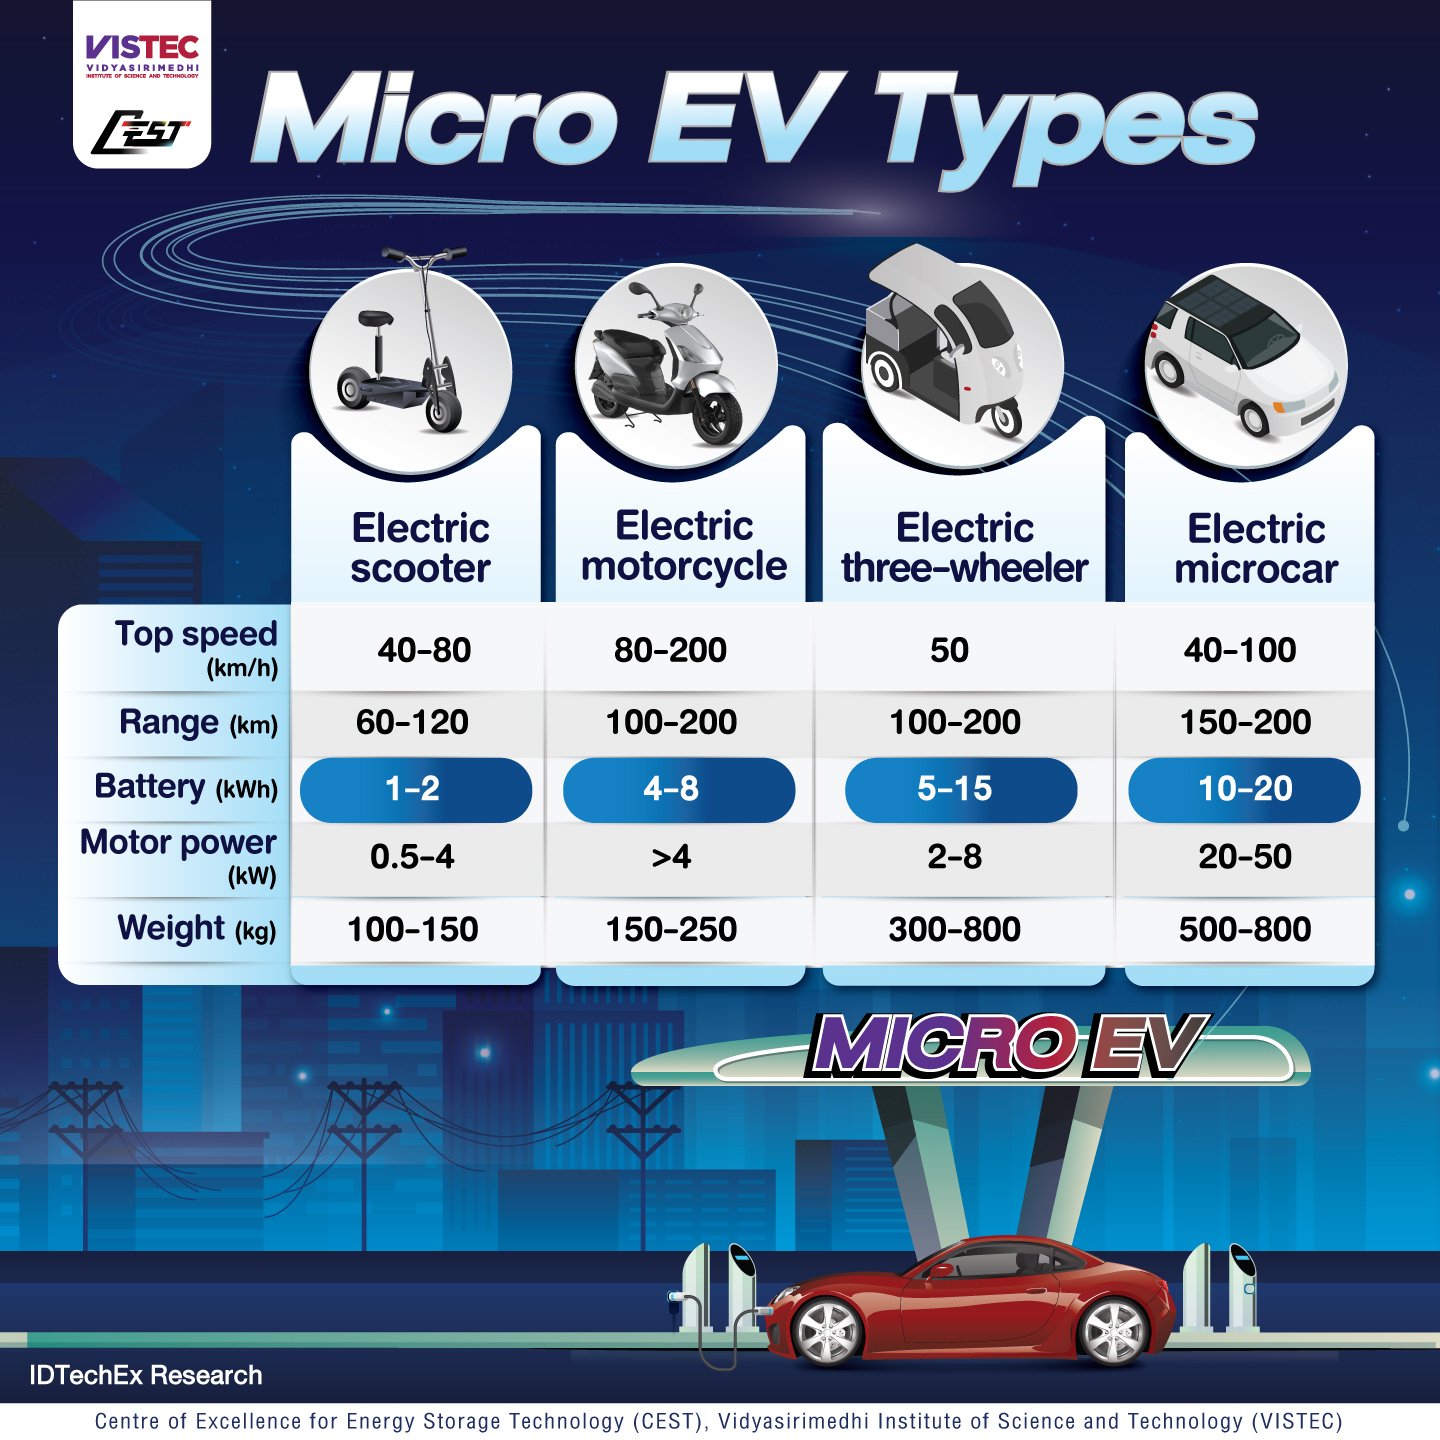 Micro EV Types Source: IDTechEx Research